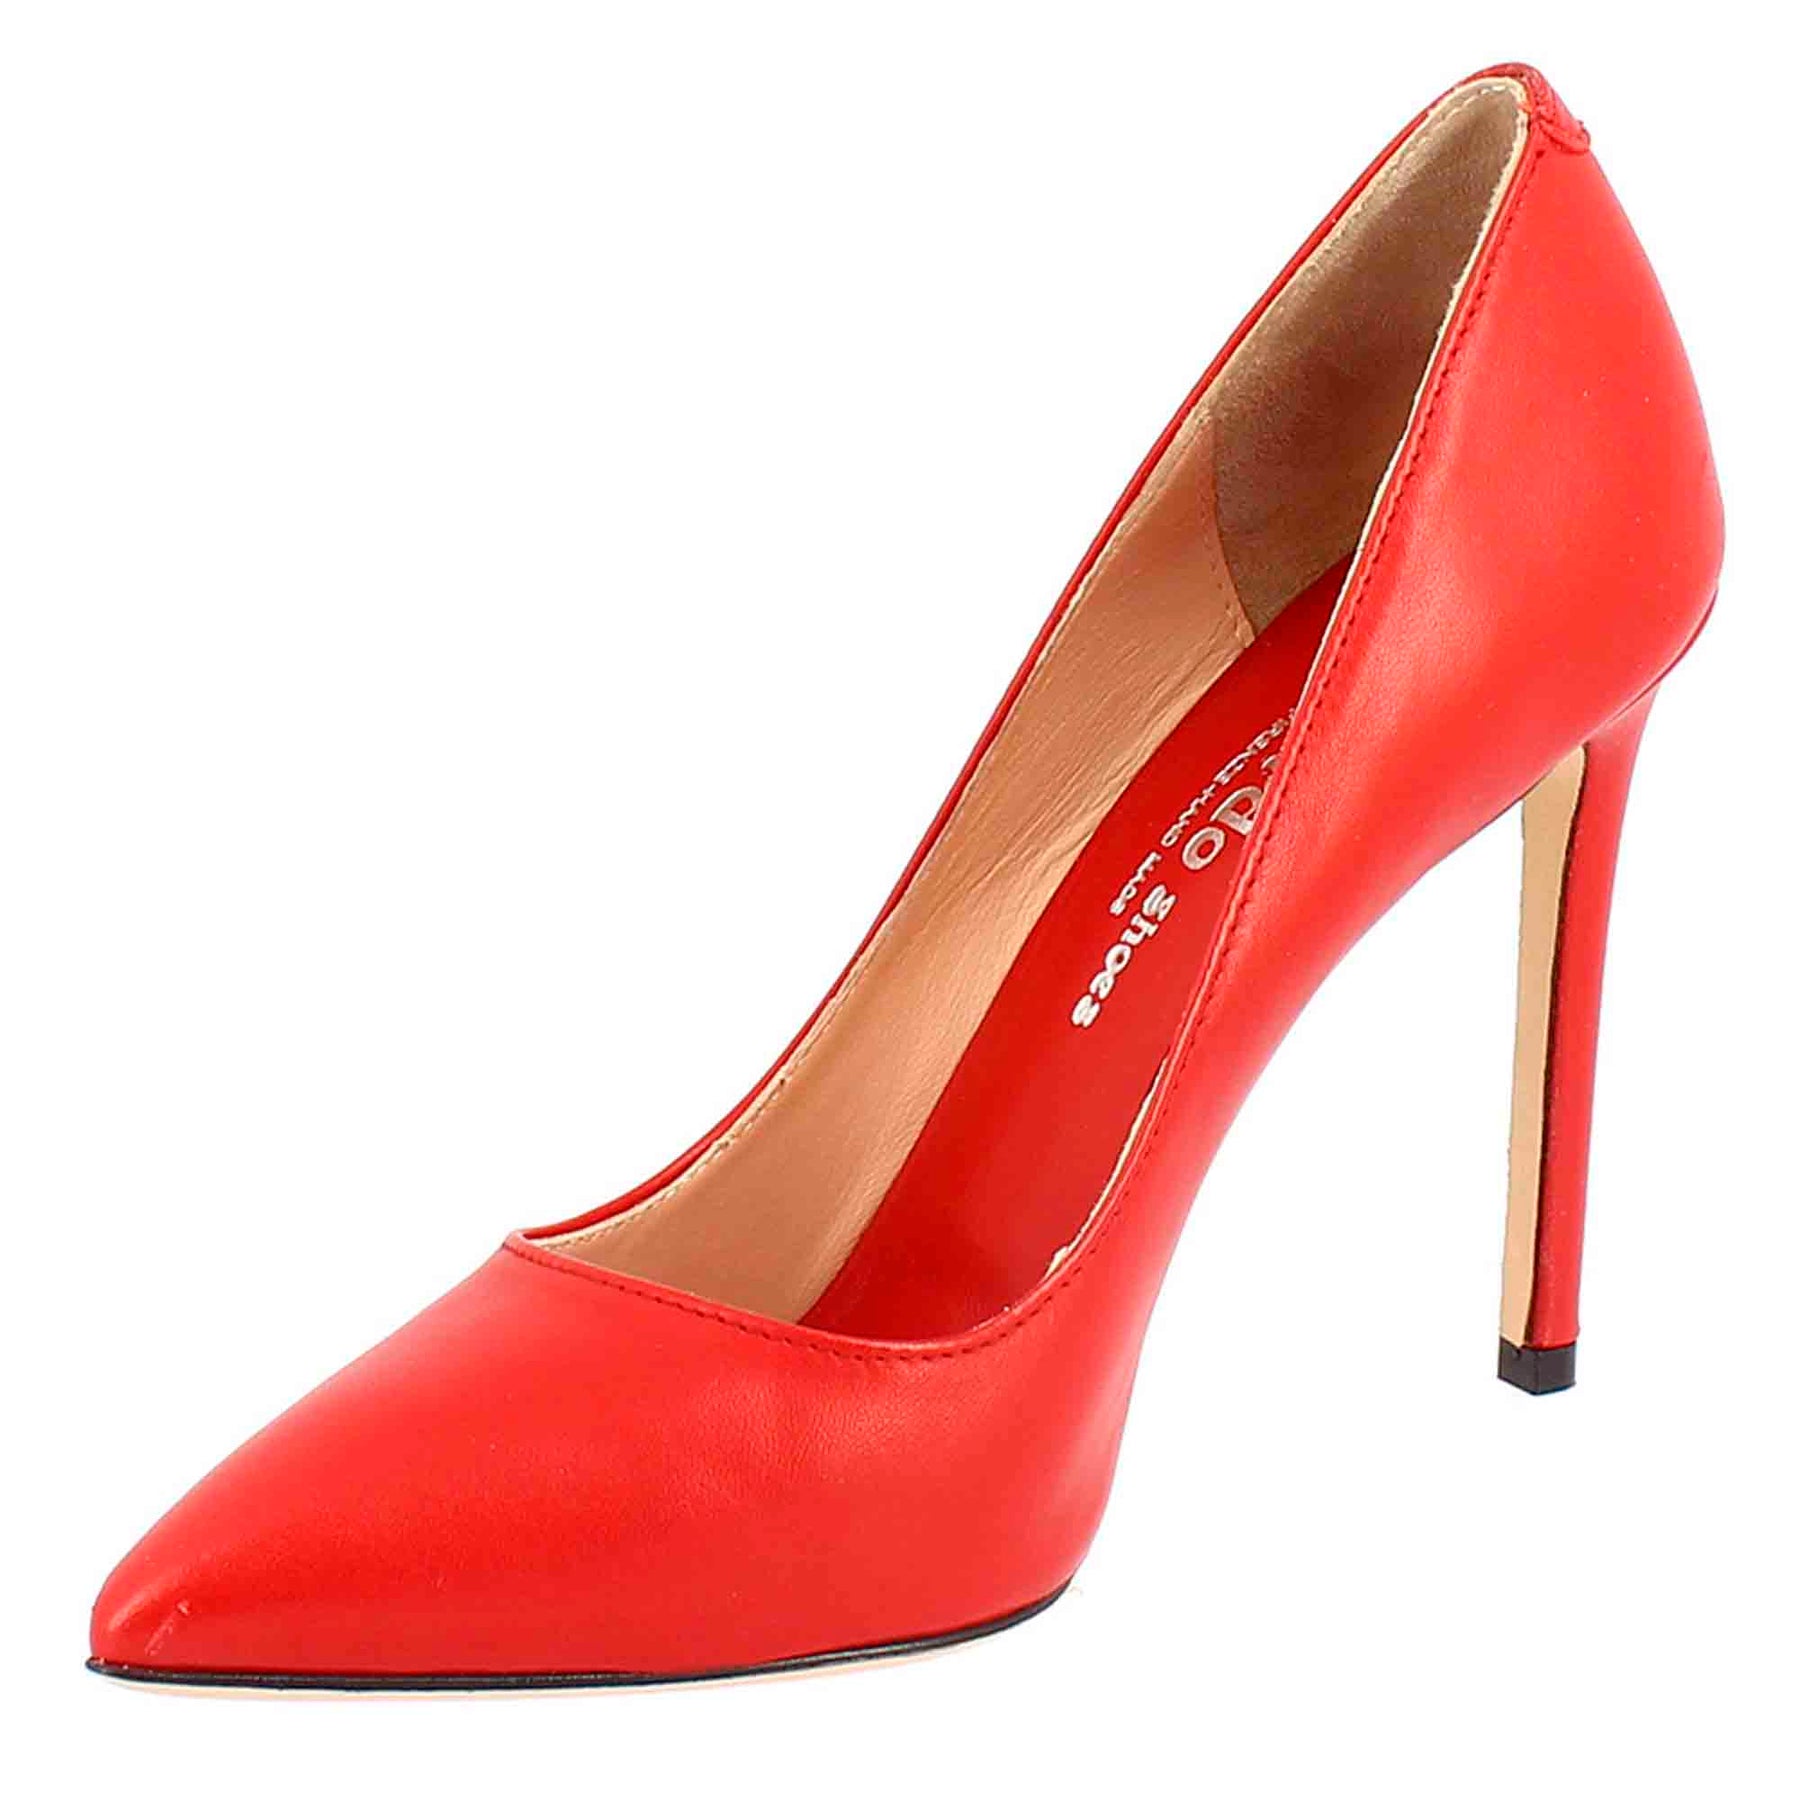 Buy GENSHUO High Heel, 10cm/3.94 Inch Stiletto High Heel Shoes for Women  Pointed Toe Party Evening Dress Pumps Prom…, Red, 5 at Amazon.in